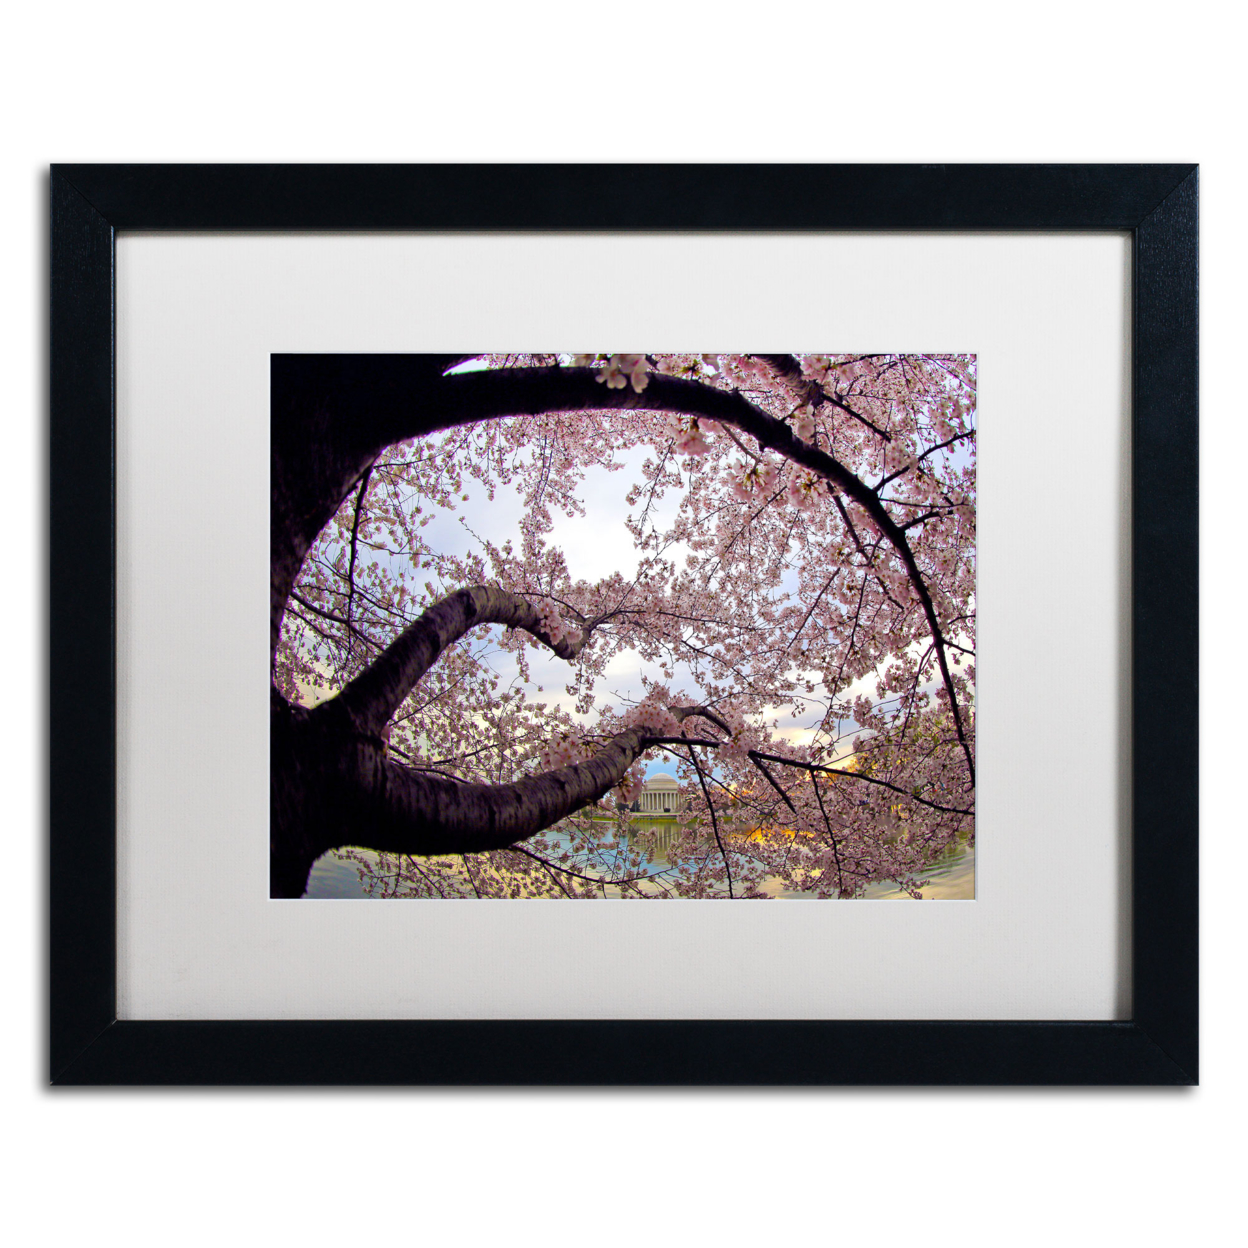 CATeyes 'Cherry Blossoms 2014-1' Black Wooden Framed Art 18 X 22 Inches